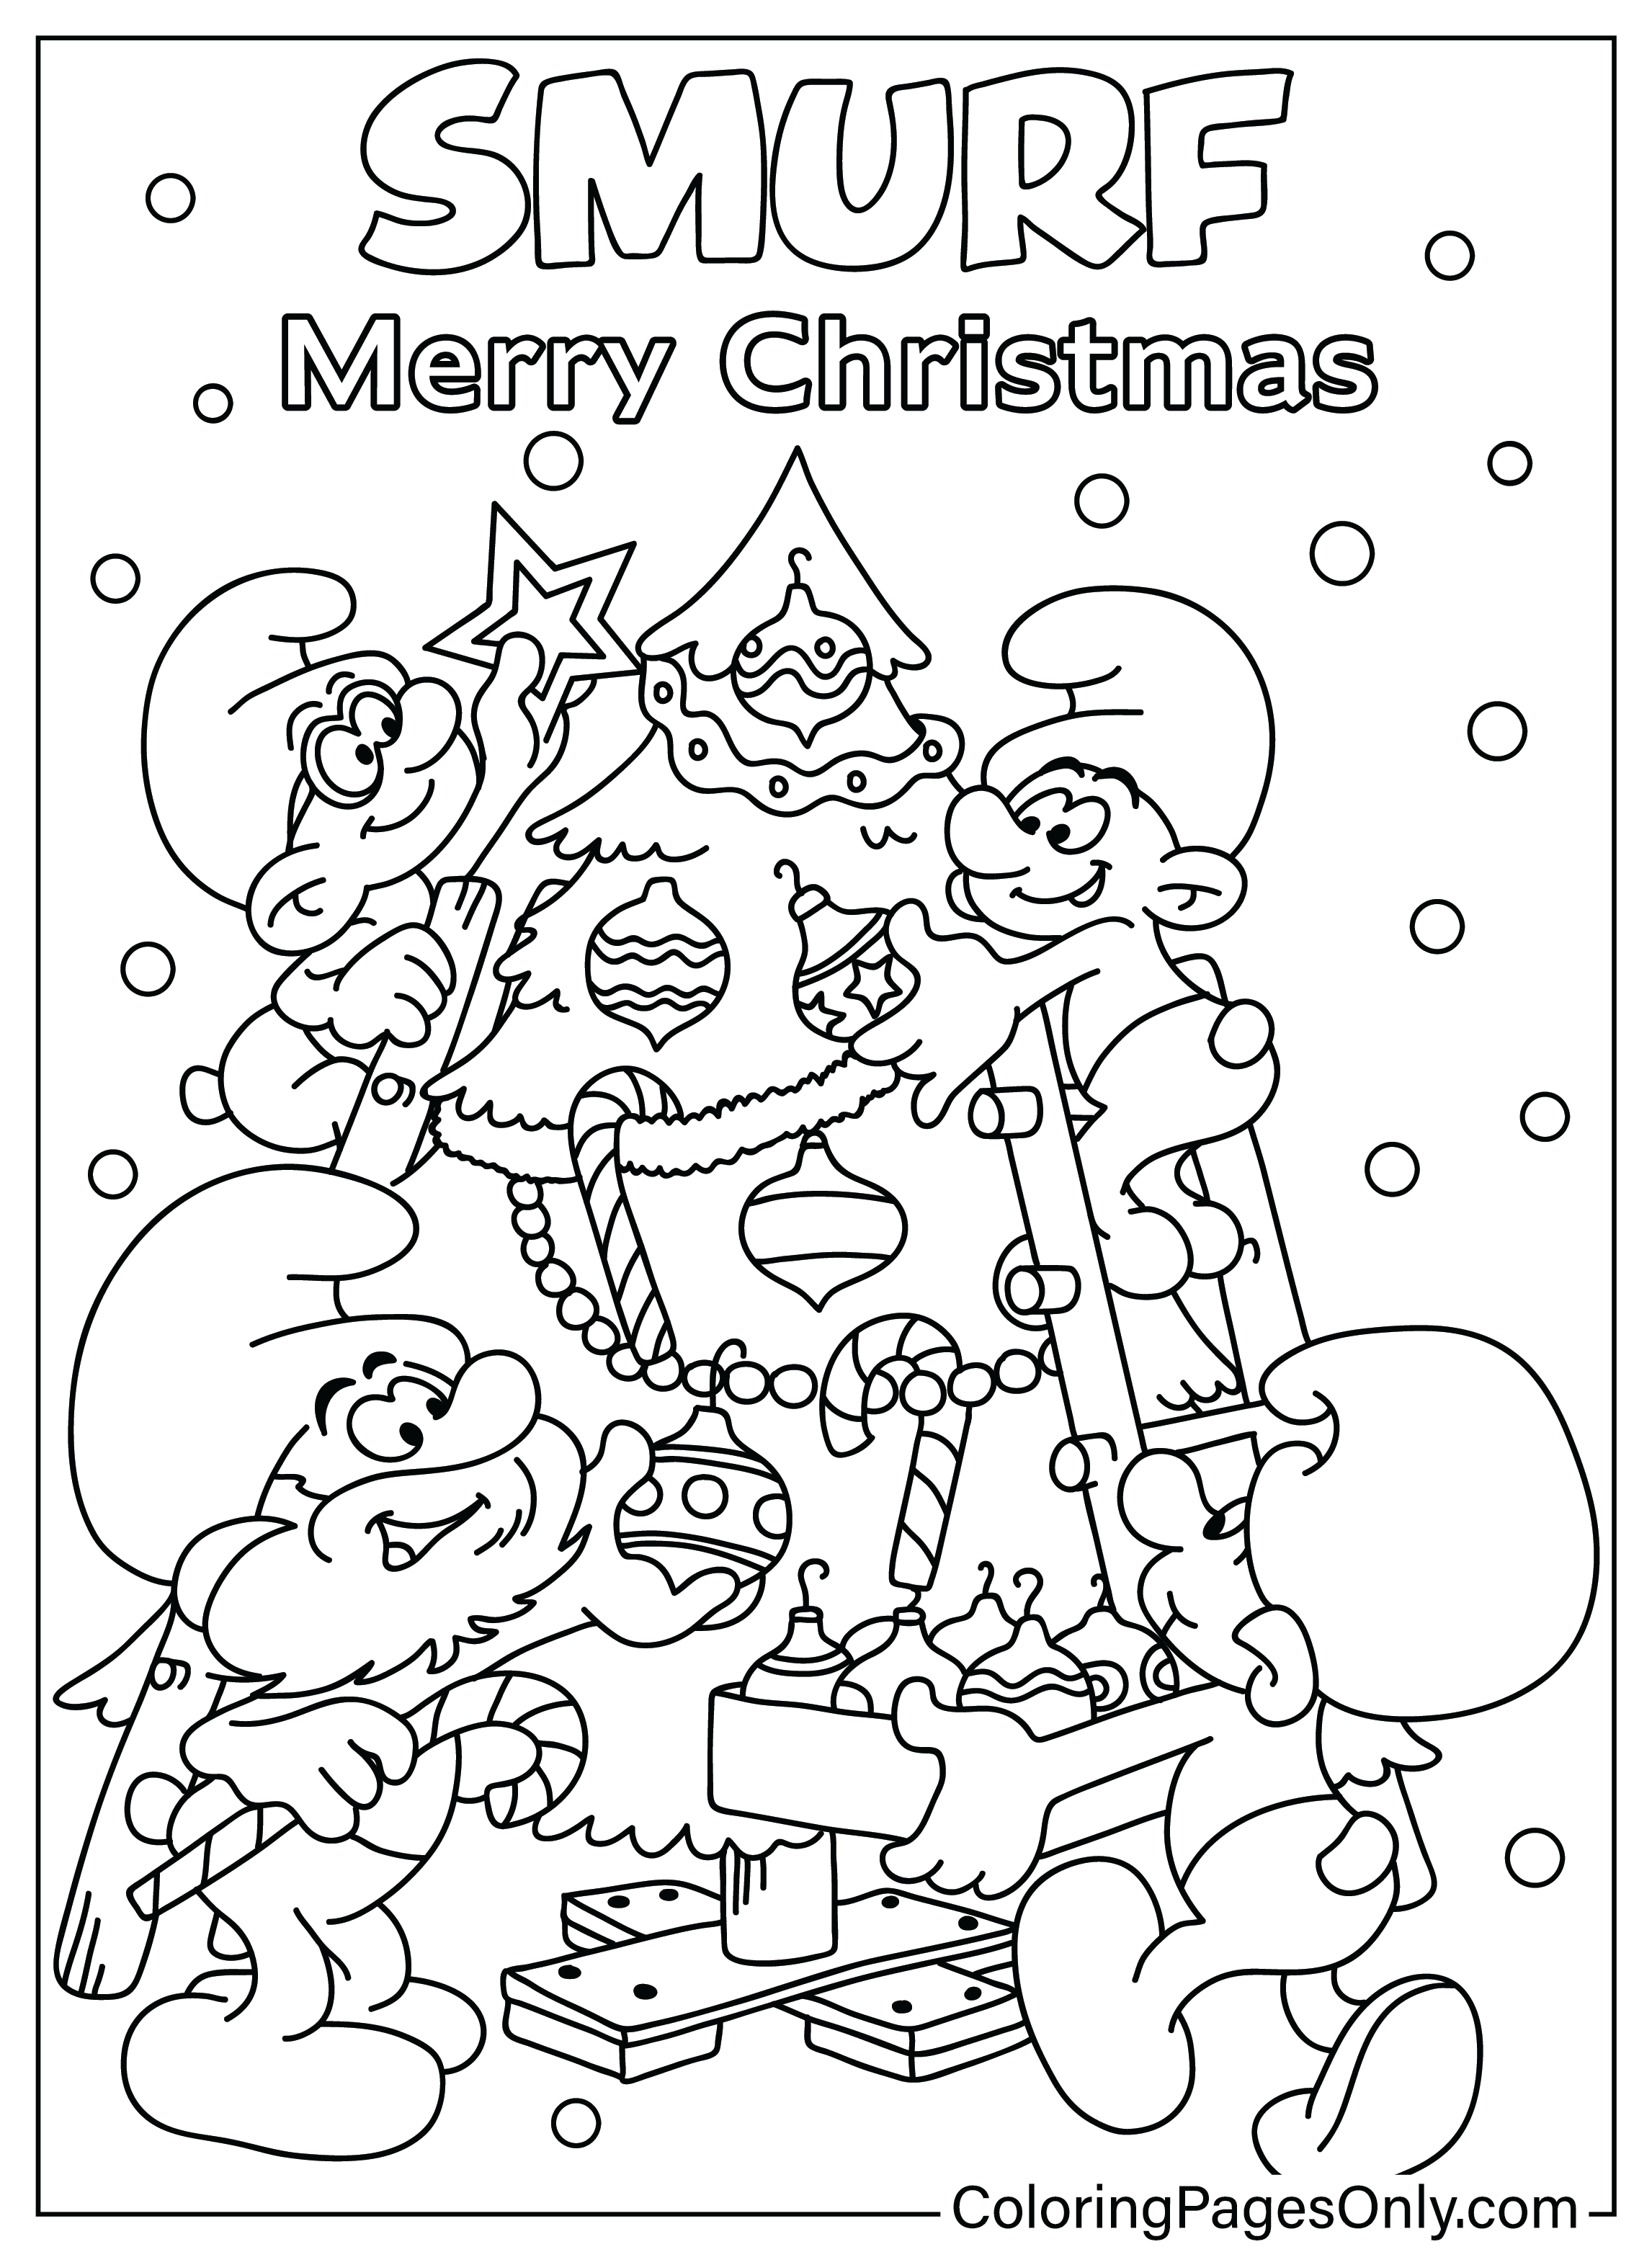 Christmas Smurfs Coloring Page from Christmas Cartoon